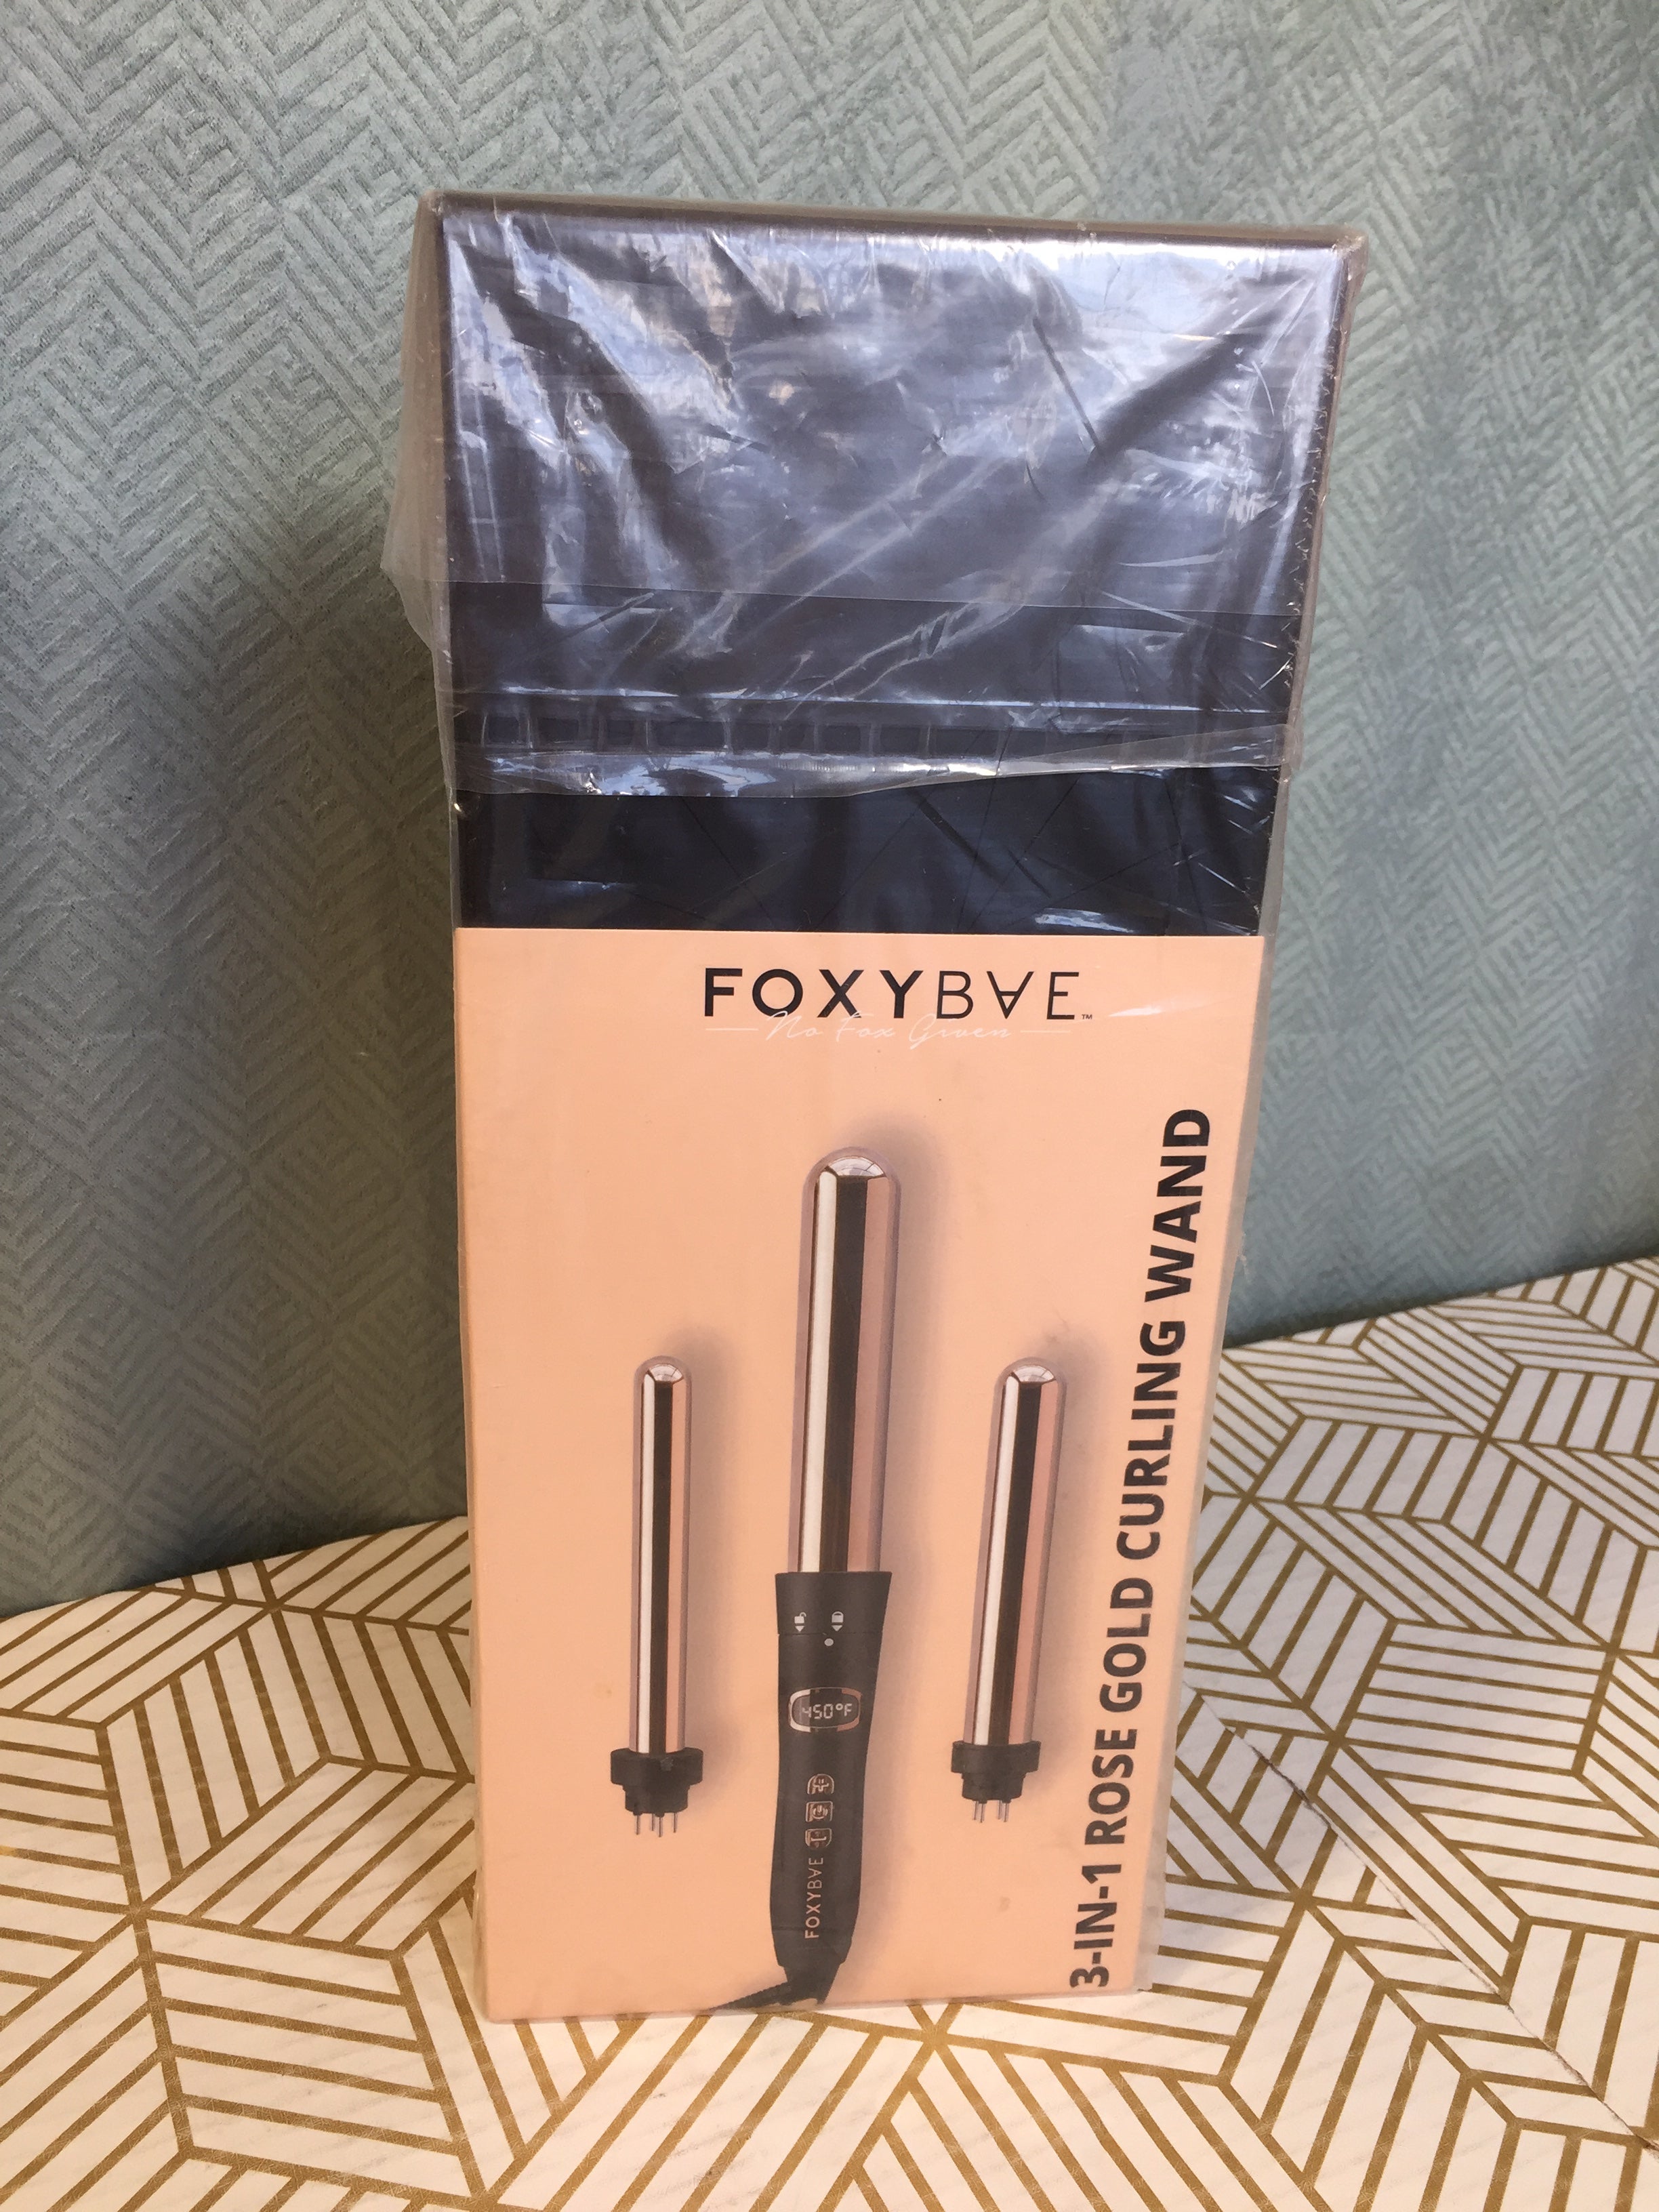 FoxyBae Rose Gold 3-in-1 Curling Wand - Ionic Professional Curling Iron (7922975178990)